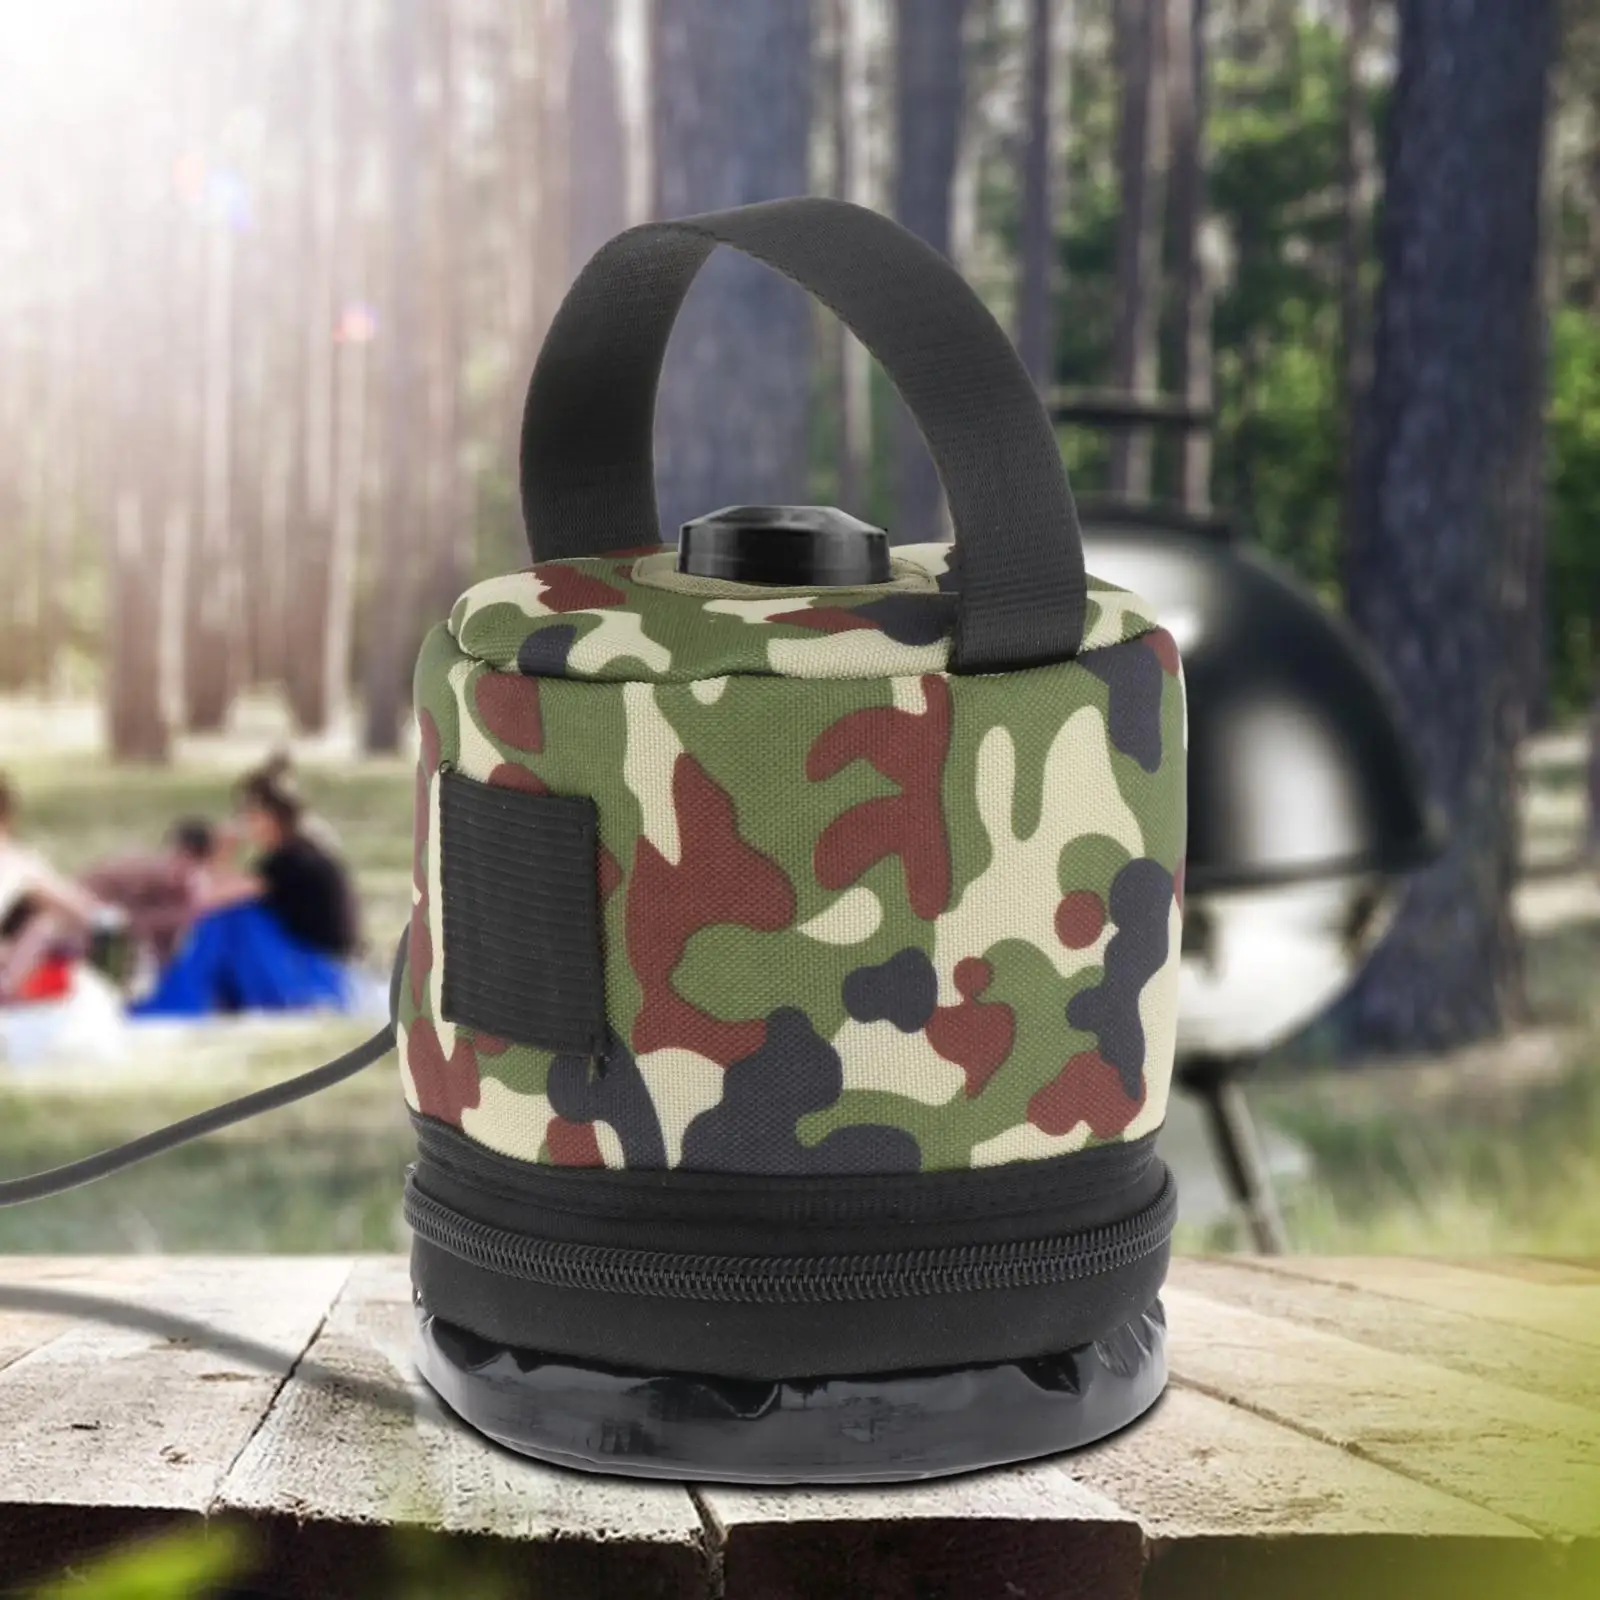 Camping Gas Canister Cover USB Heated Durable Portable Protector Storage Bag